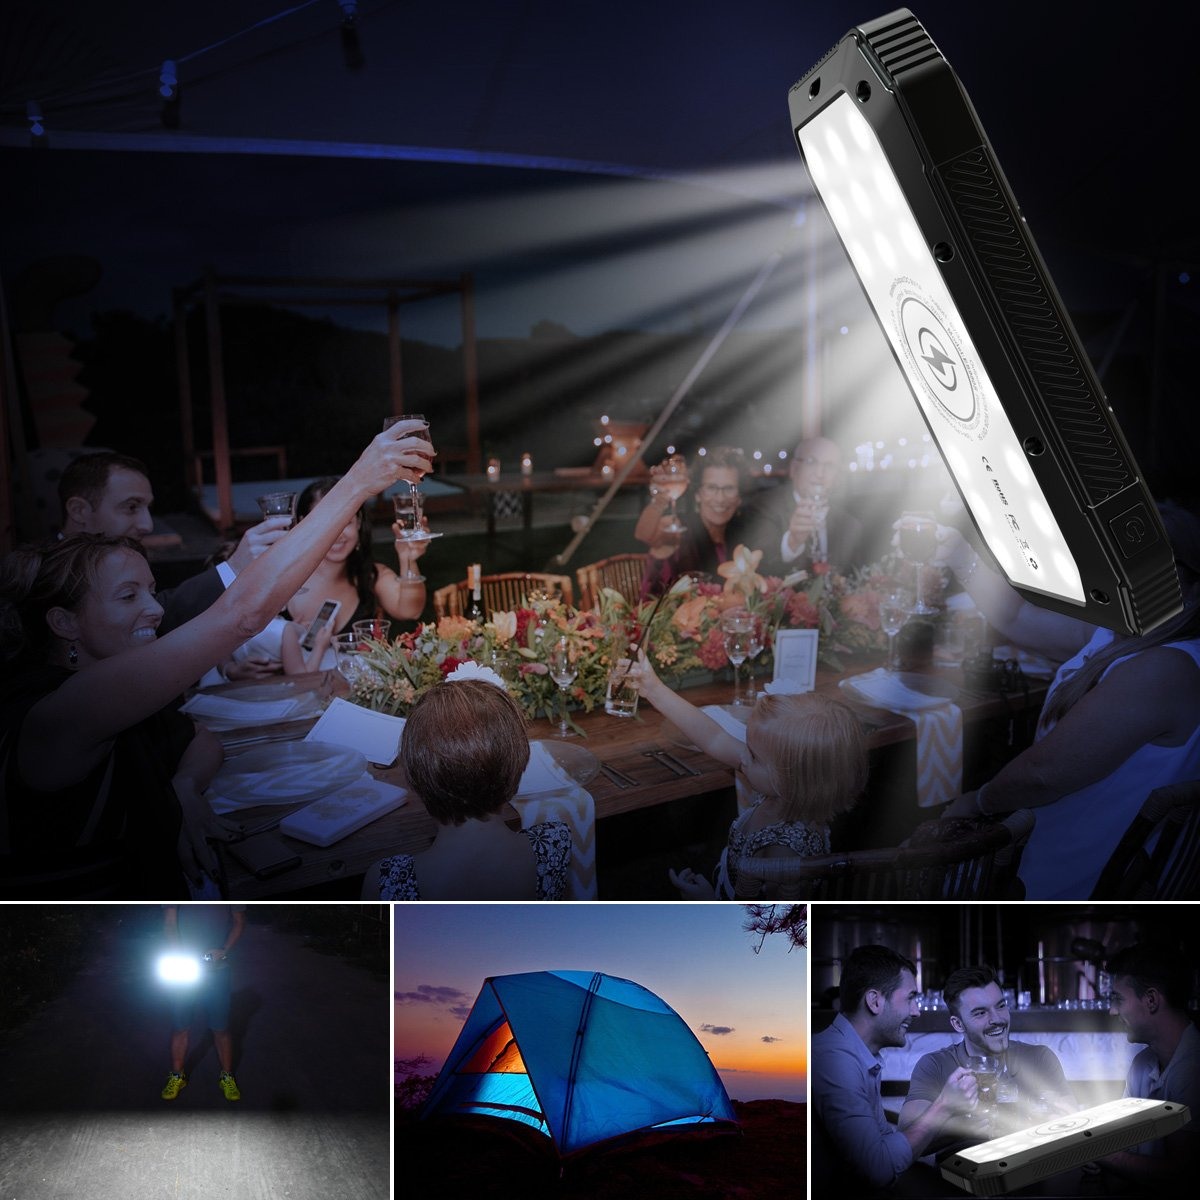 Sun Chaser Mini Solar Powered Wireless Phone Charger 10,000 mAh With LED Flood Light